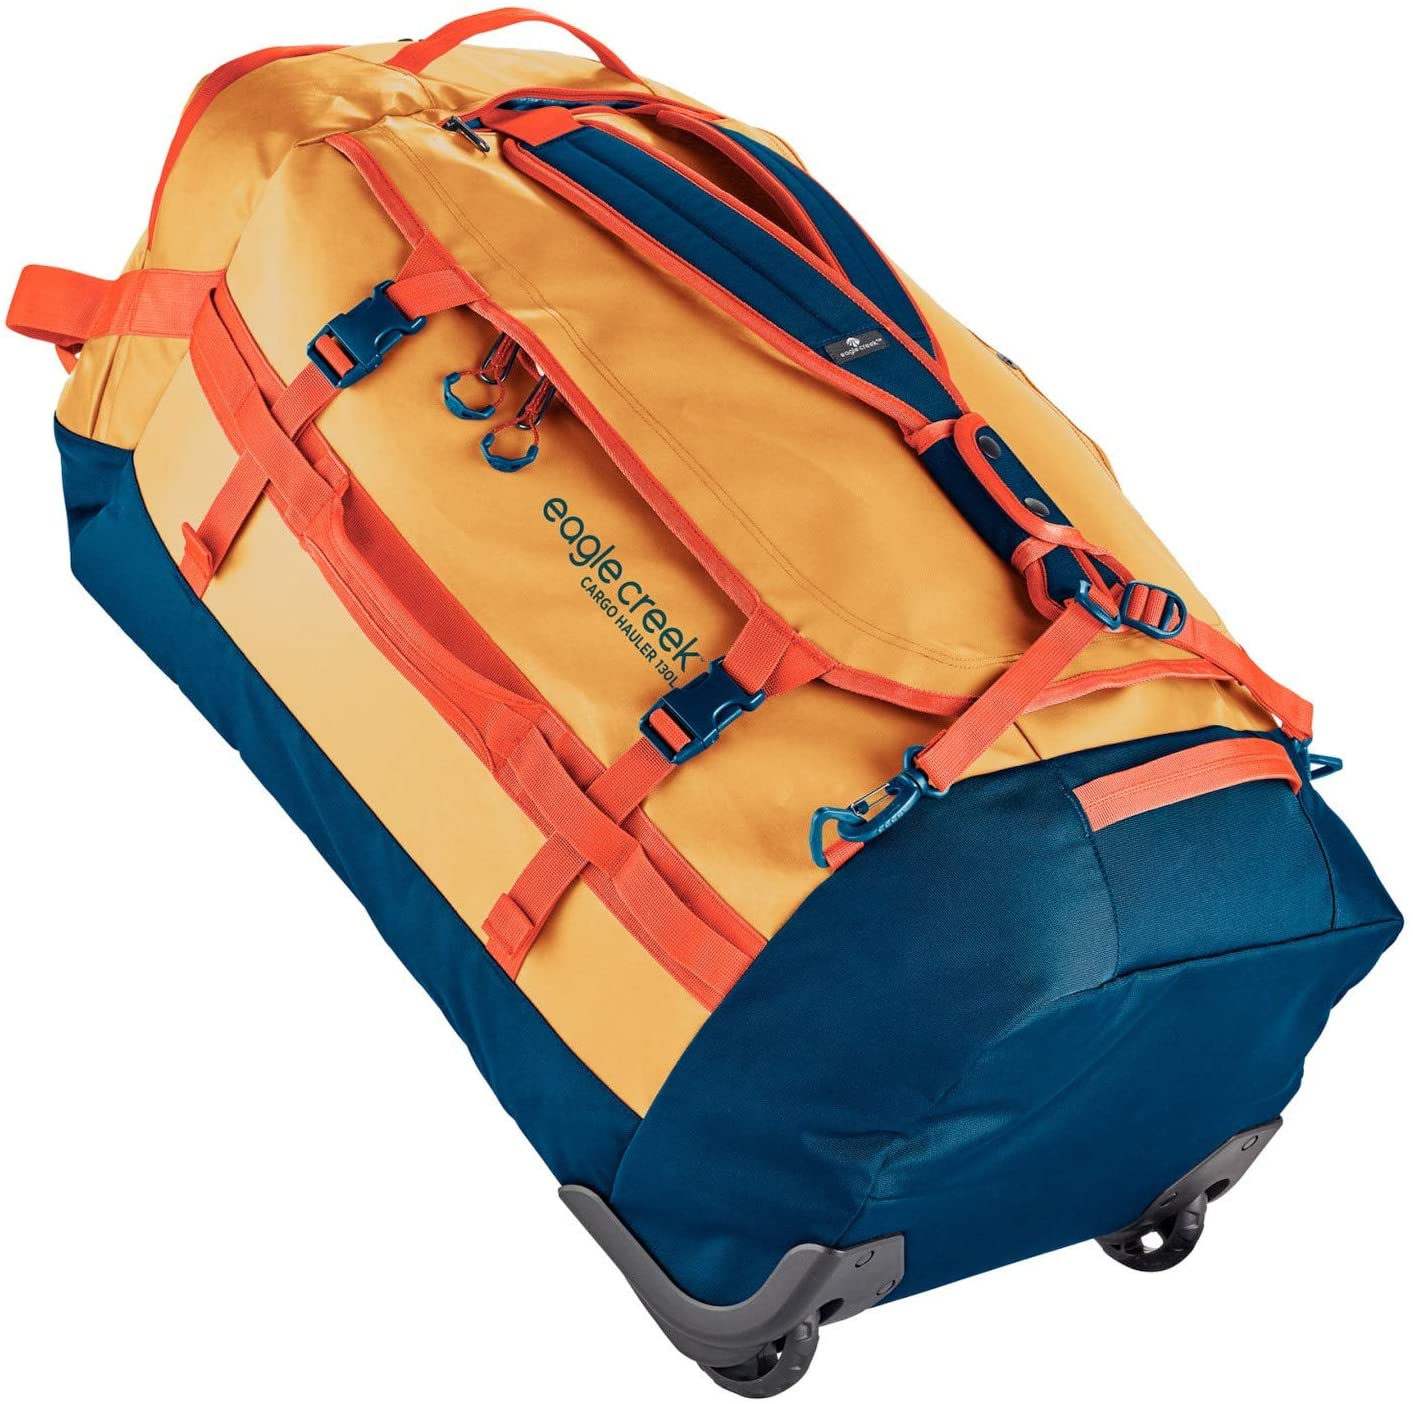 Eagle Creek Cargo Hauler Wheeled Duffel 130L in Sahara Yellow color from the front